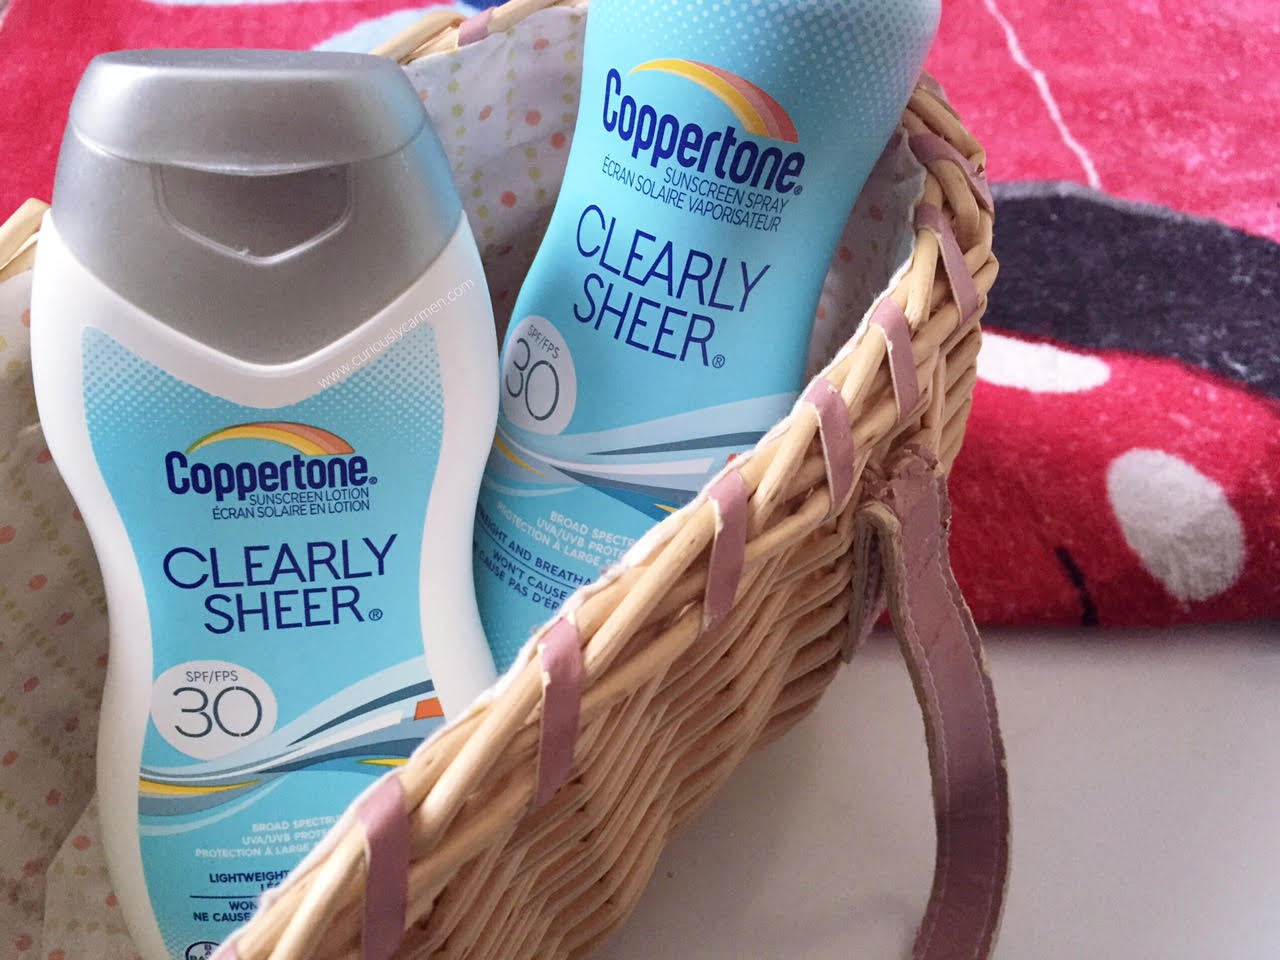 Coppertone Clearly Sheer Sunscreen Review